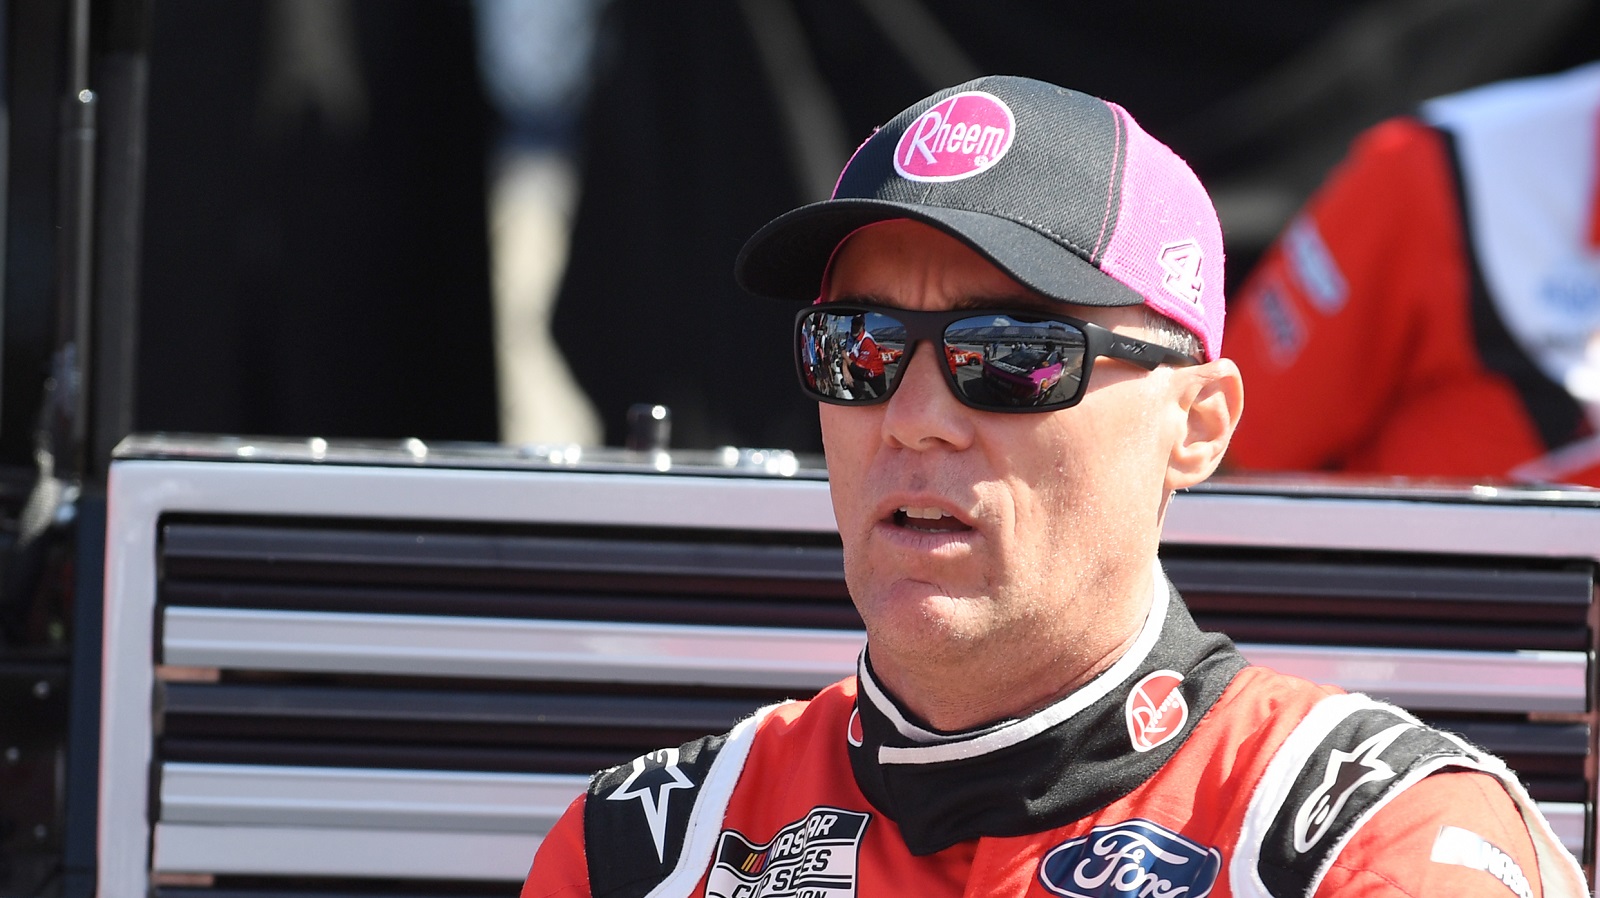 Kevin Harvick Still Has Clout at SHR After 59 Straight Winless Races